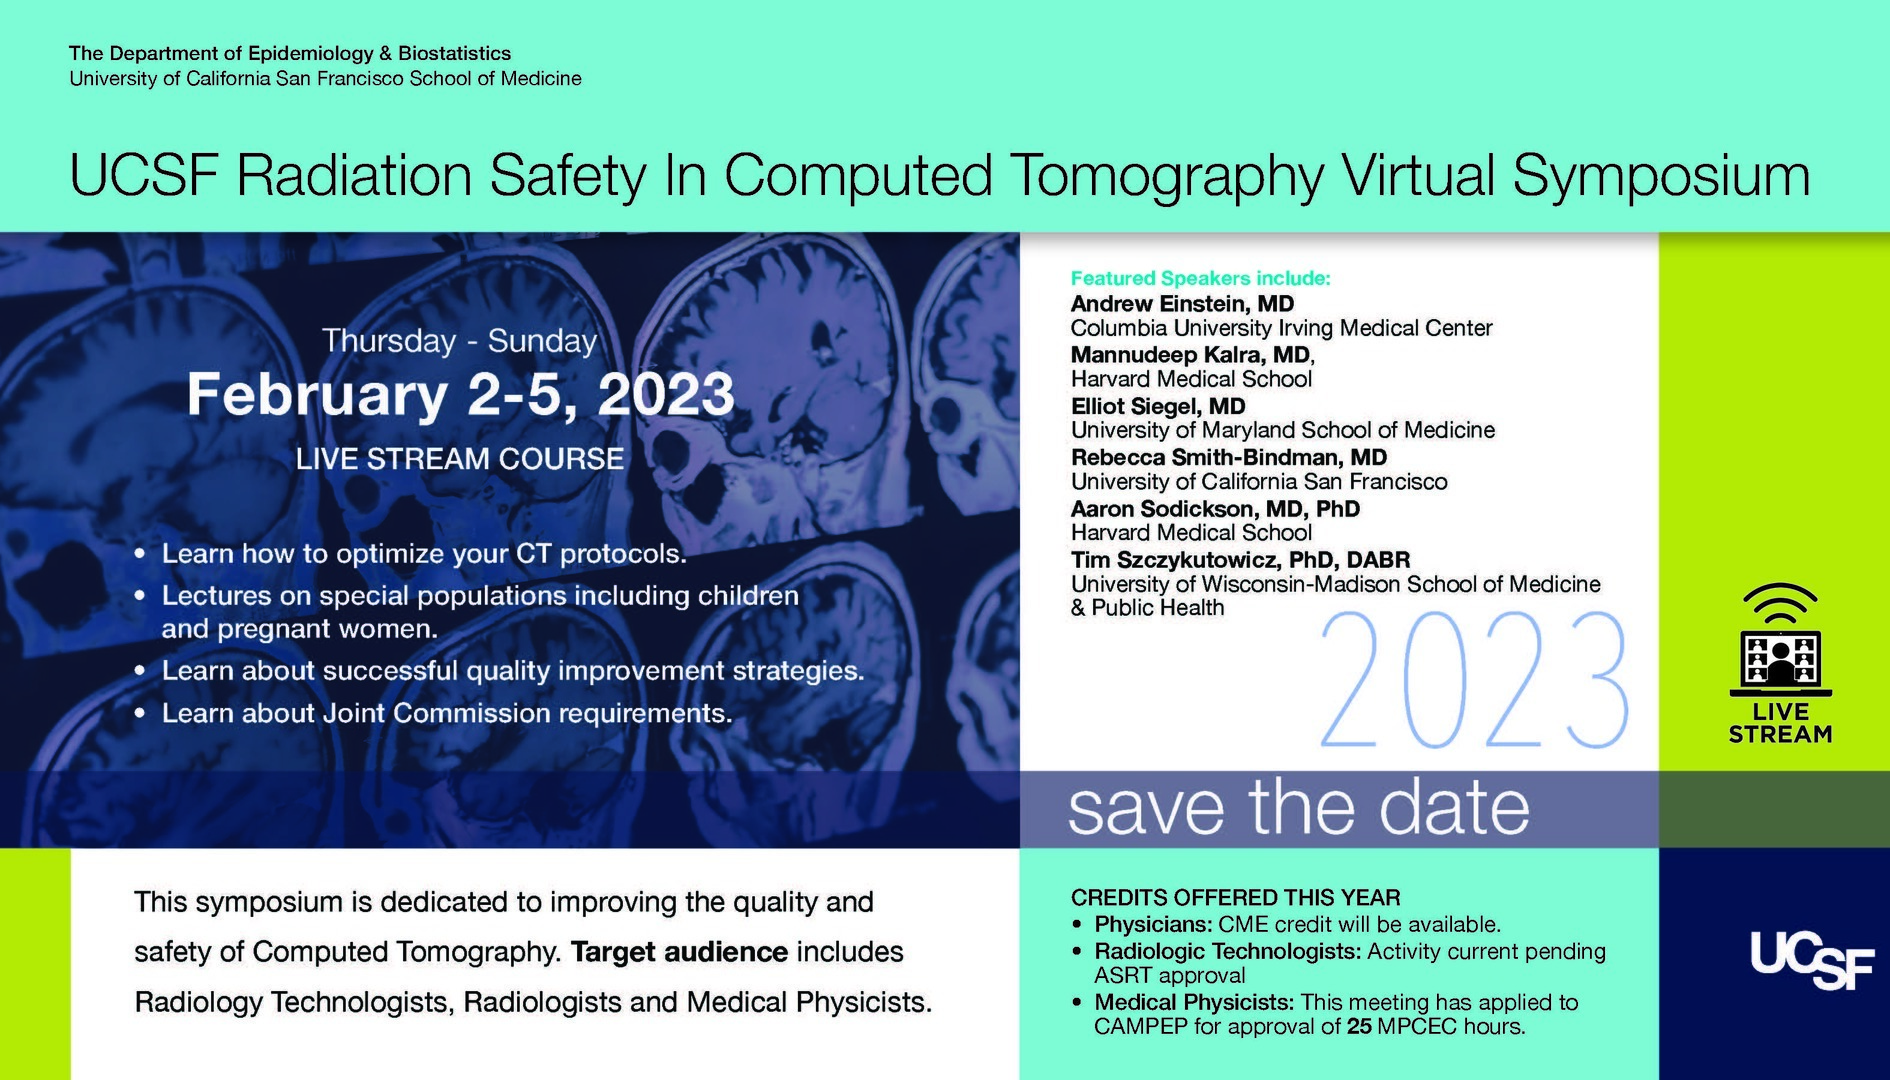 UCSF Radiation Safety In Computed Tomography Virtual Symposium, Online Event